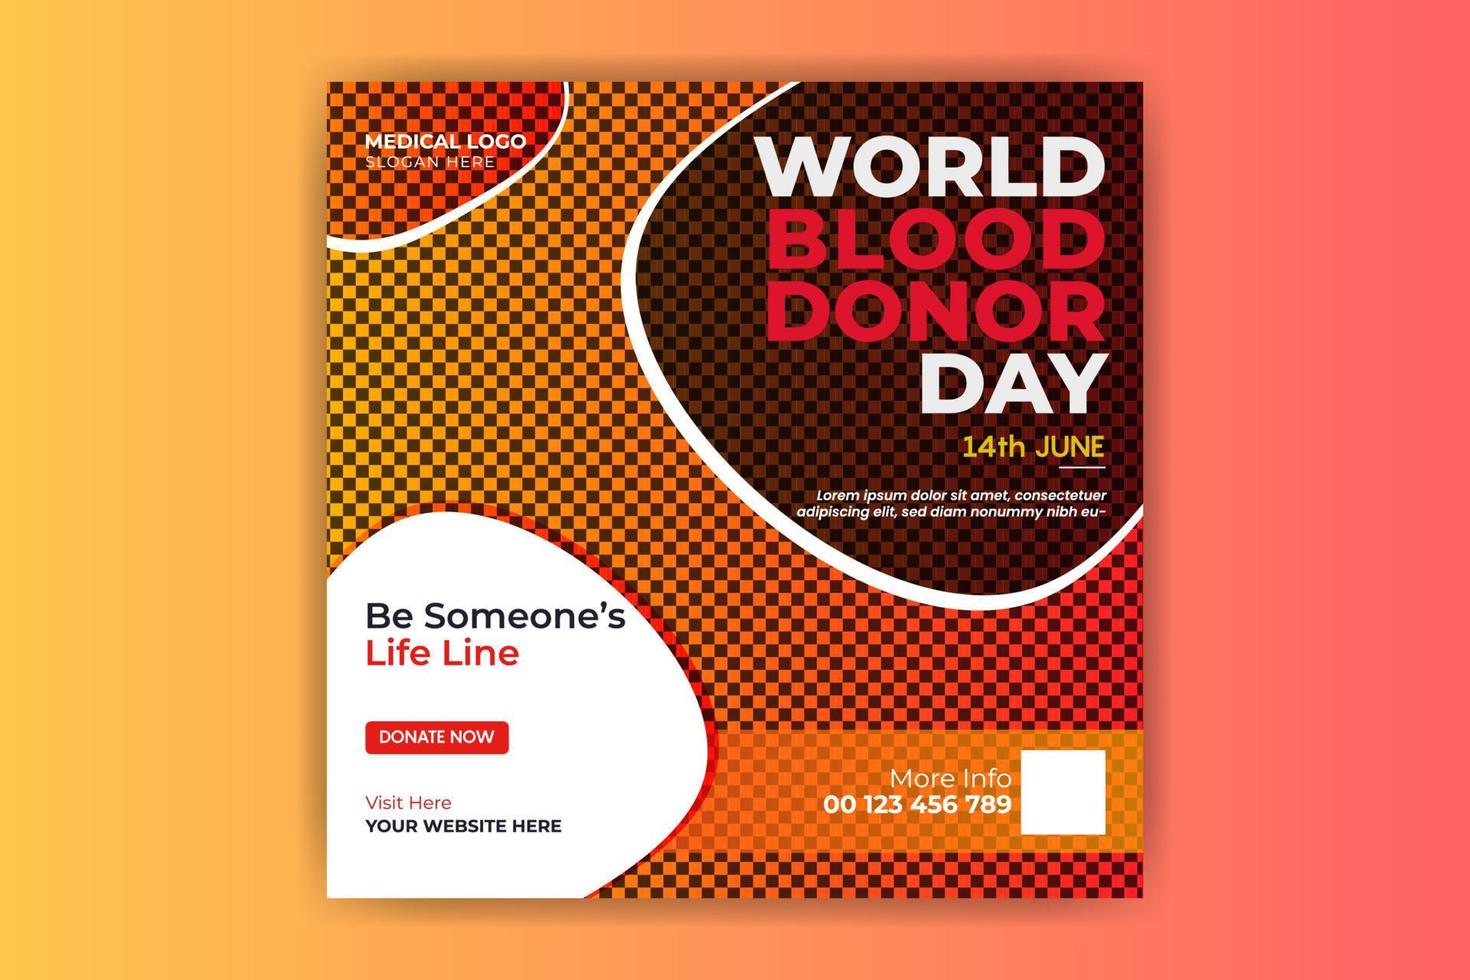 World Blood Donor Day Social Media Post Design Free Download vector